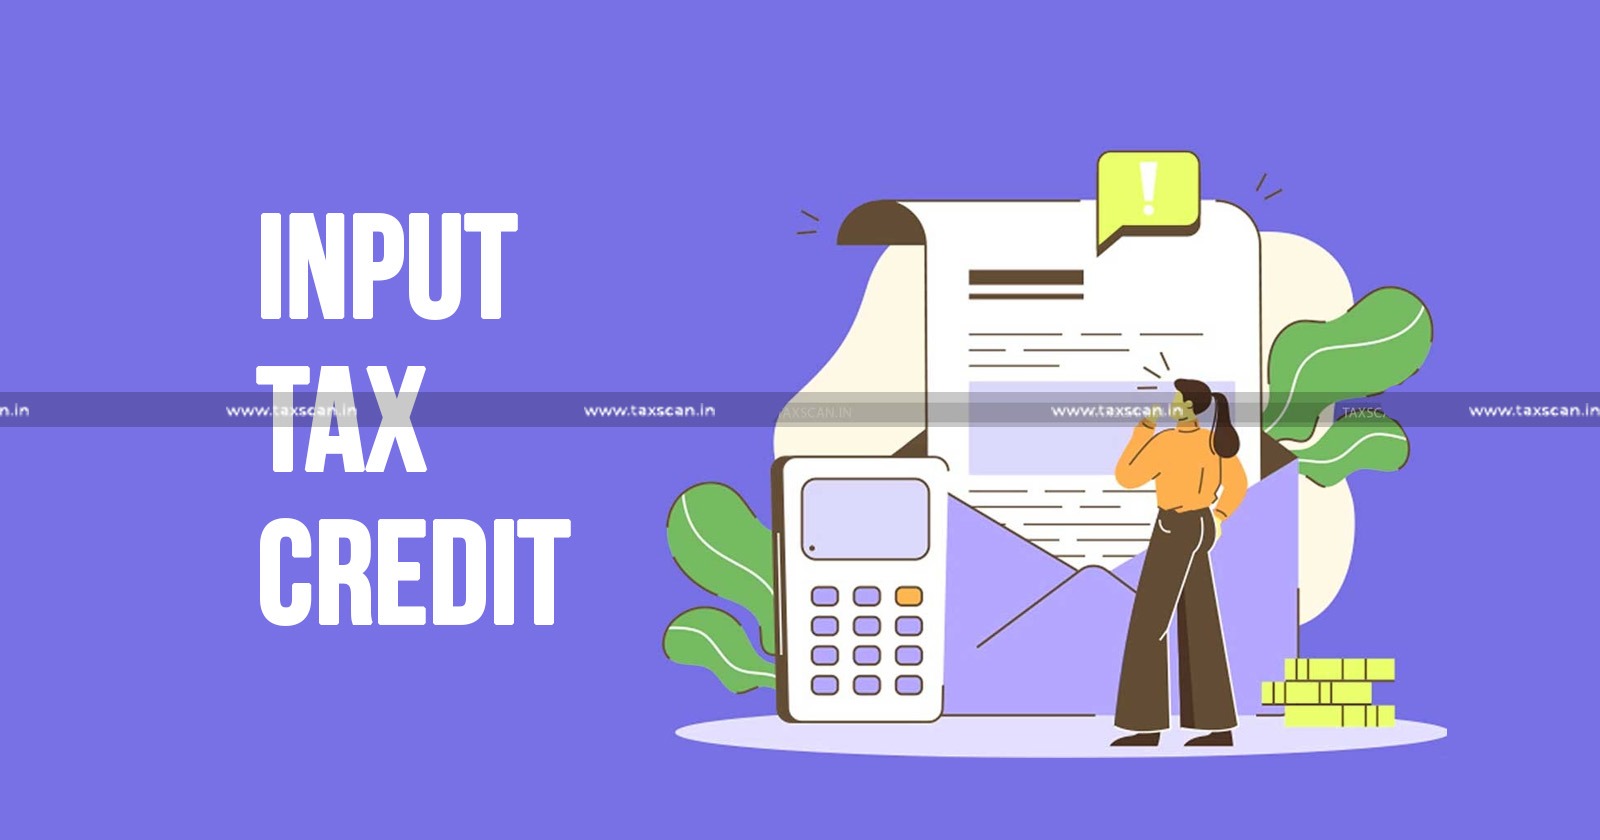 Input Tax Credit - Supplier to Avail the Benefit - CGST Act - taxscan